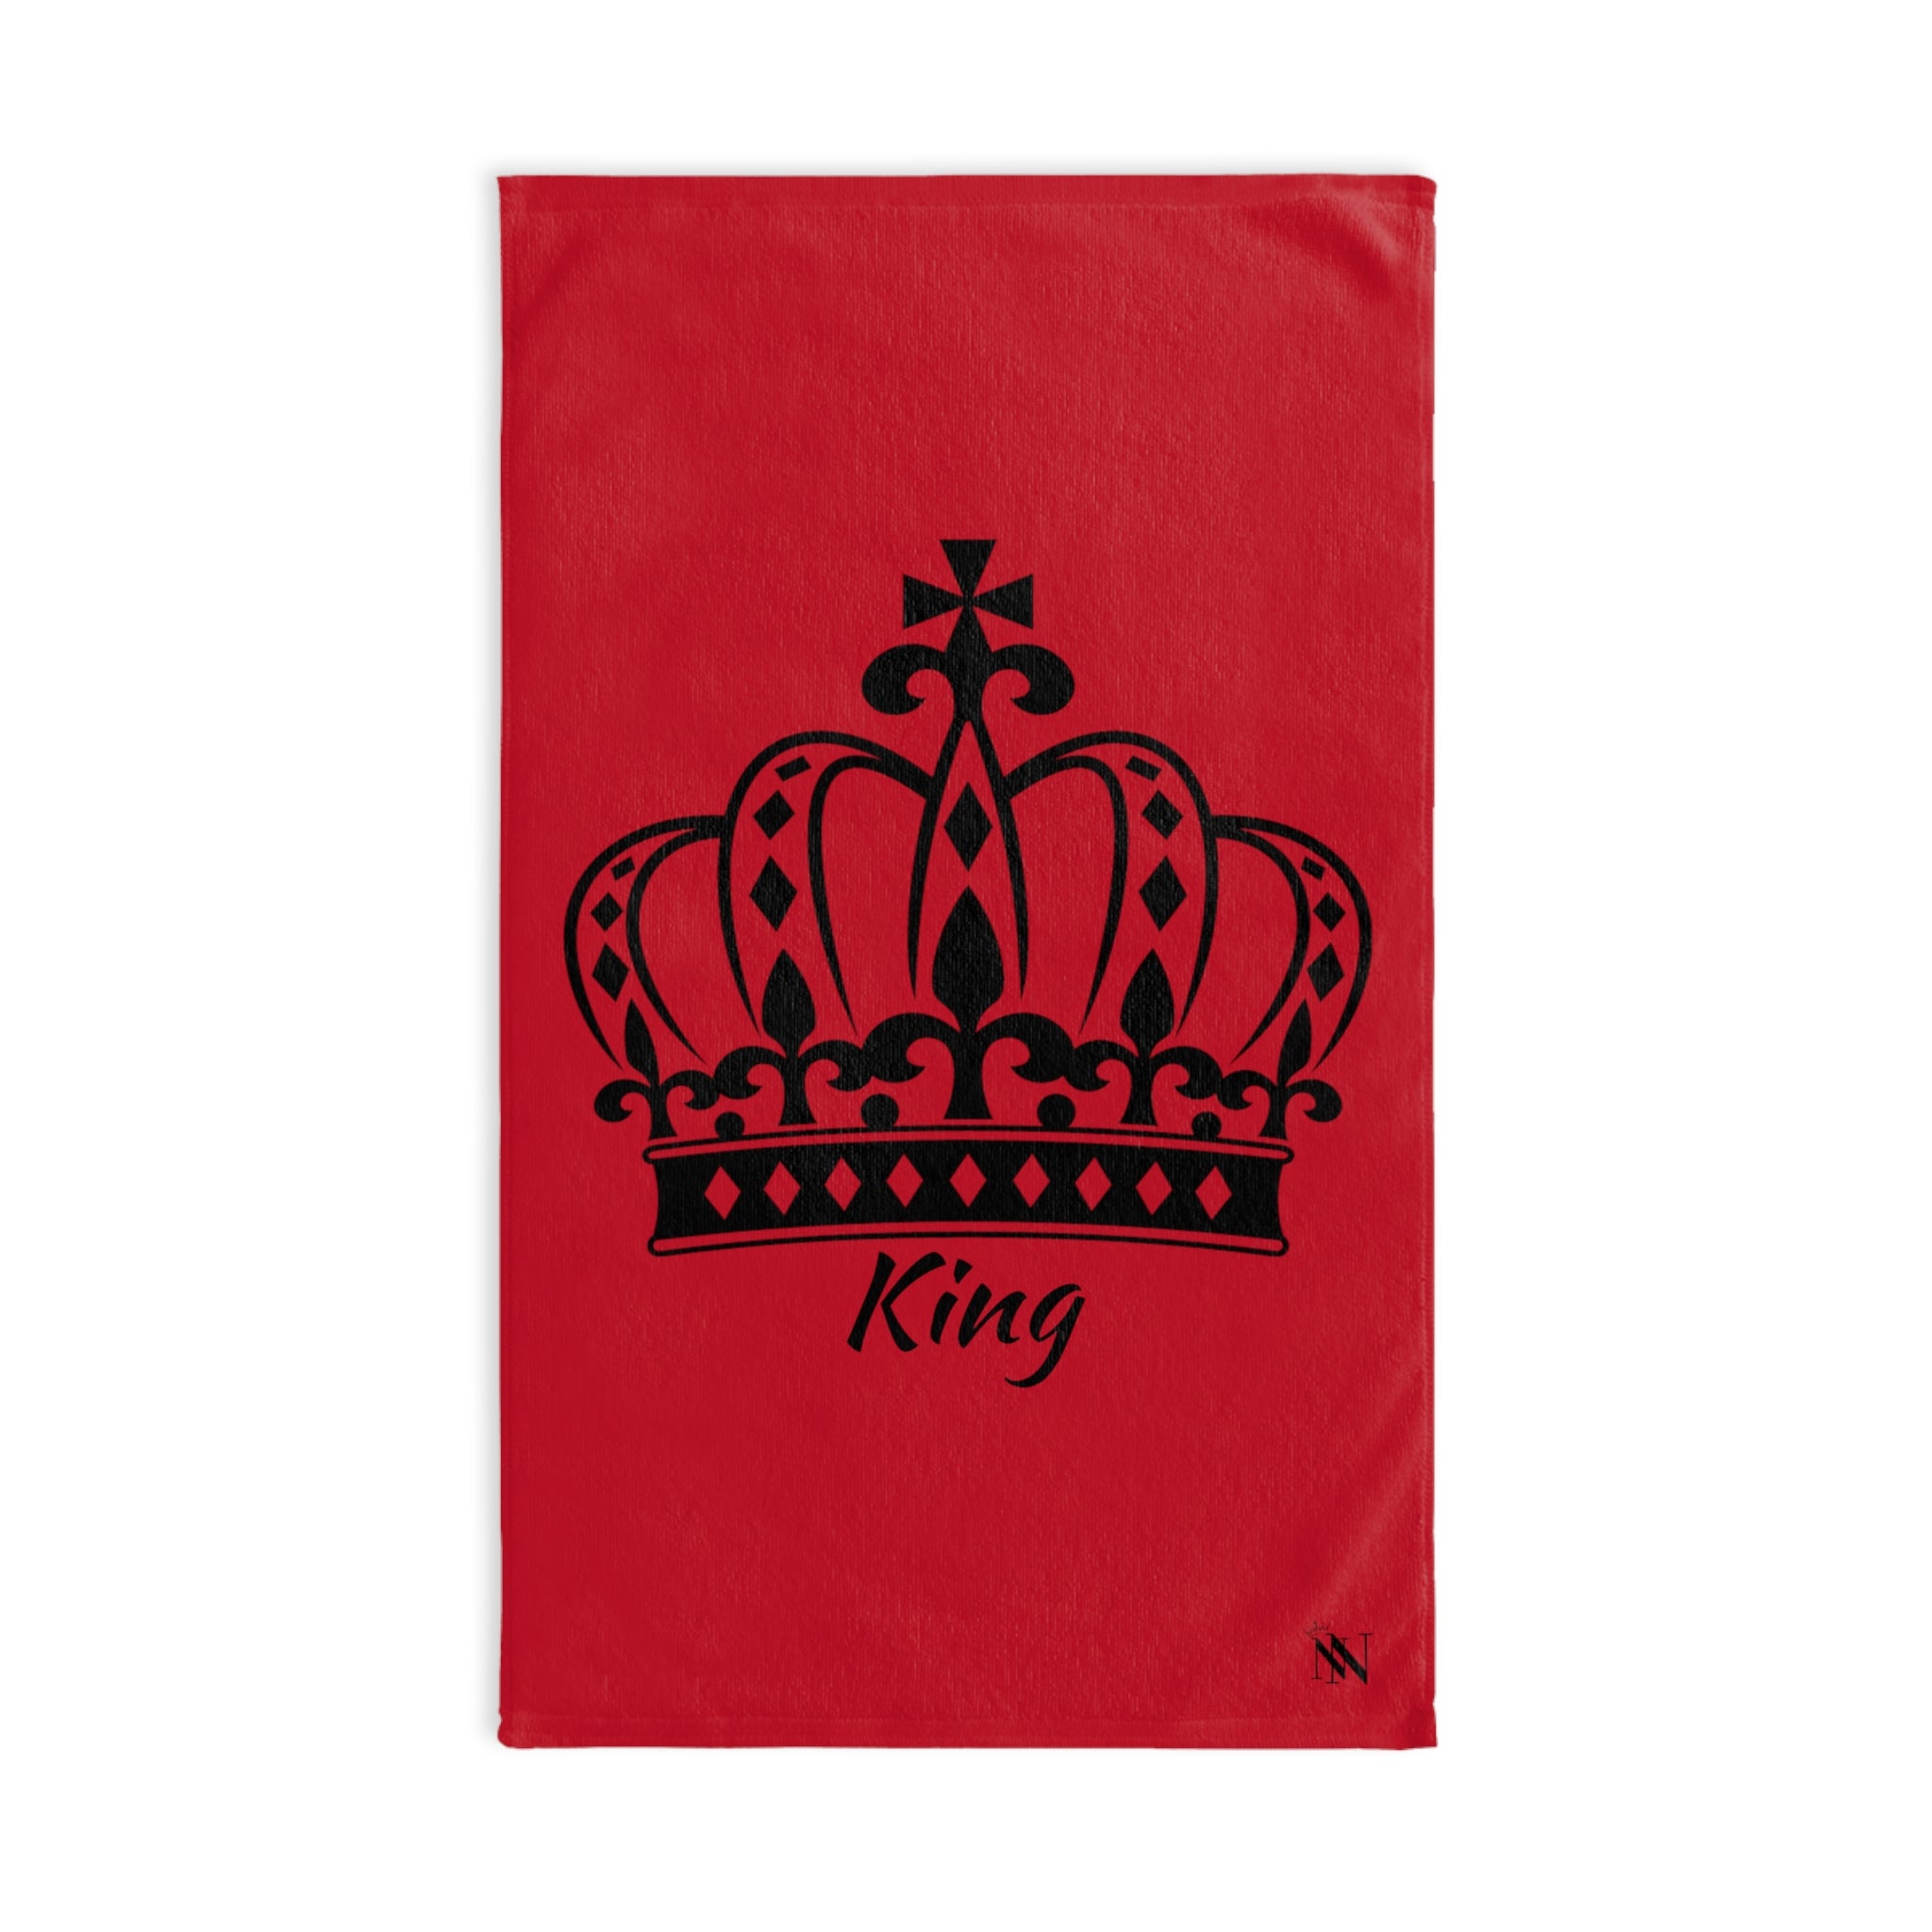 King Crown PrinceRed | Sexy Gifts for Boyfriend, Funny Towel Romantic Gift for Wedding Couple Fiance First Year 2nd Anniversary Valentines, Party Gag Gifts, Joke Humor Cloth for Husband Men BF NECTAR NAPKINS